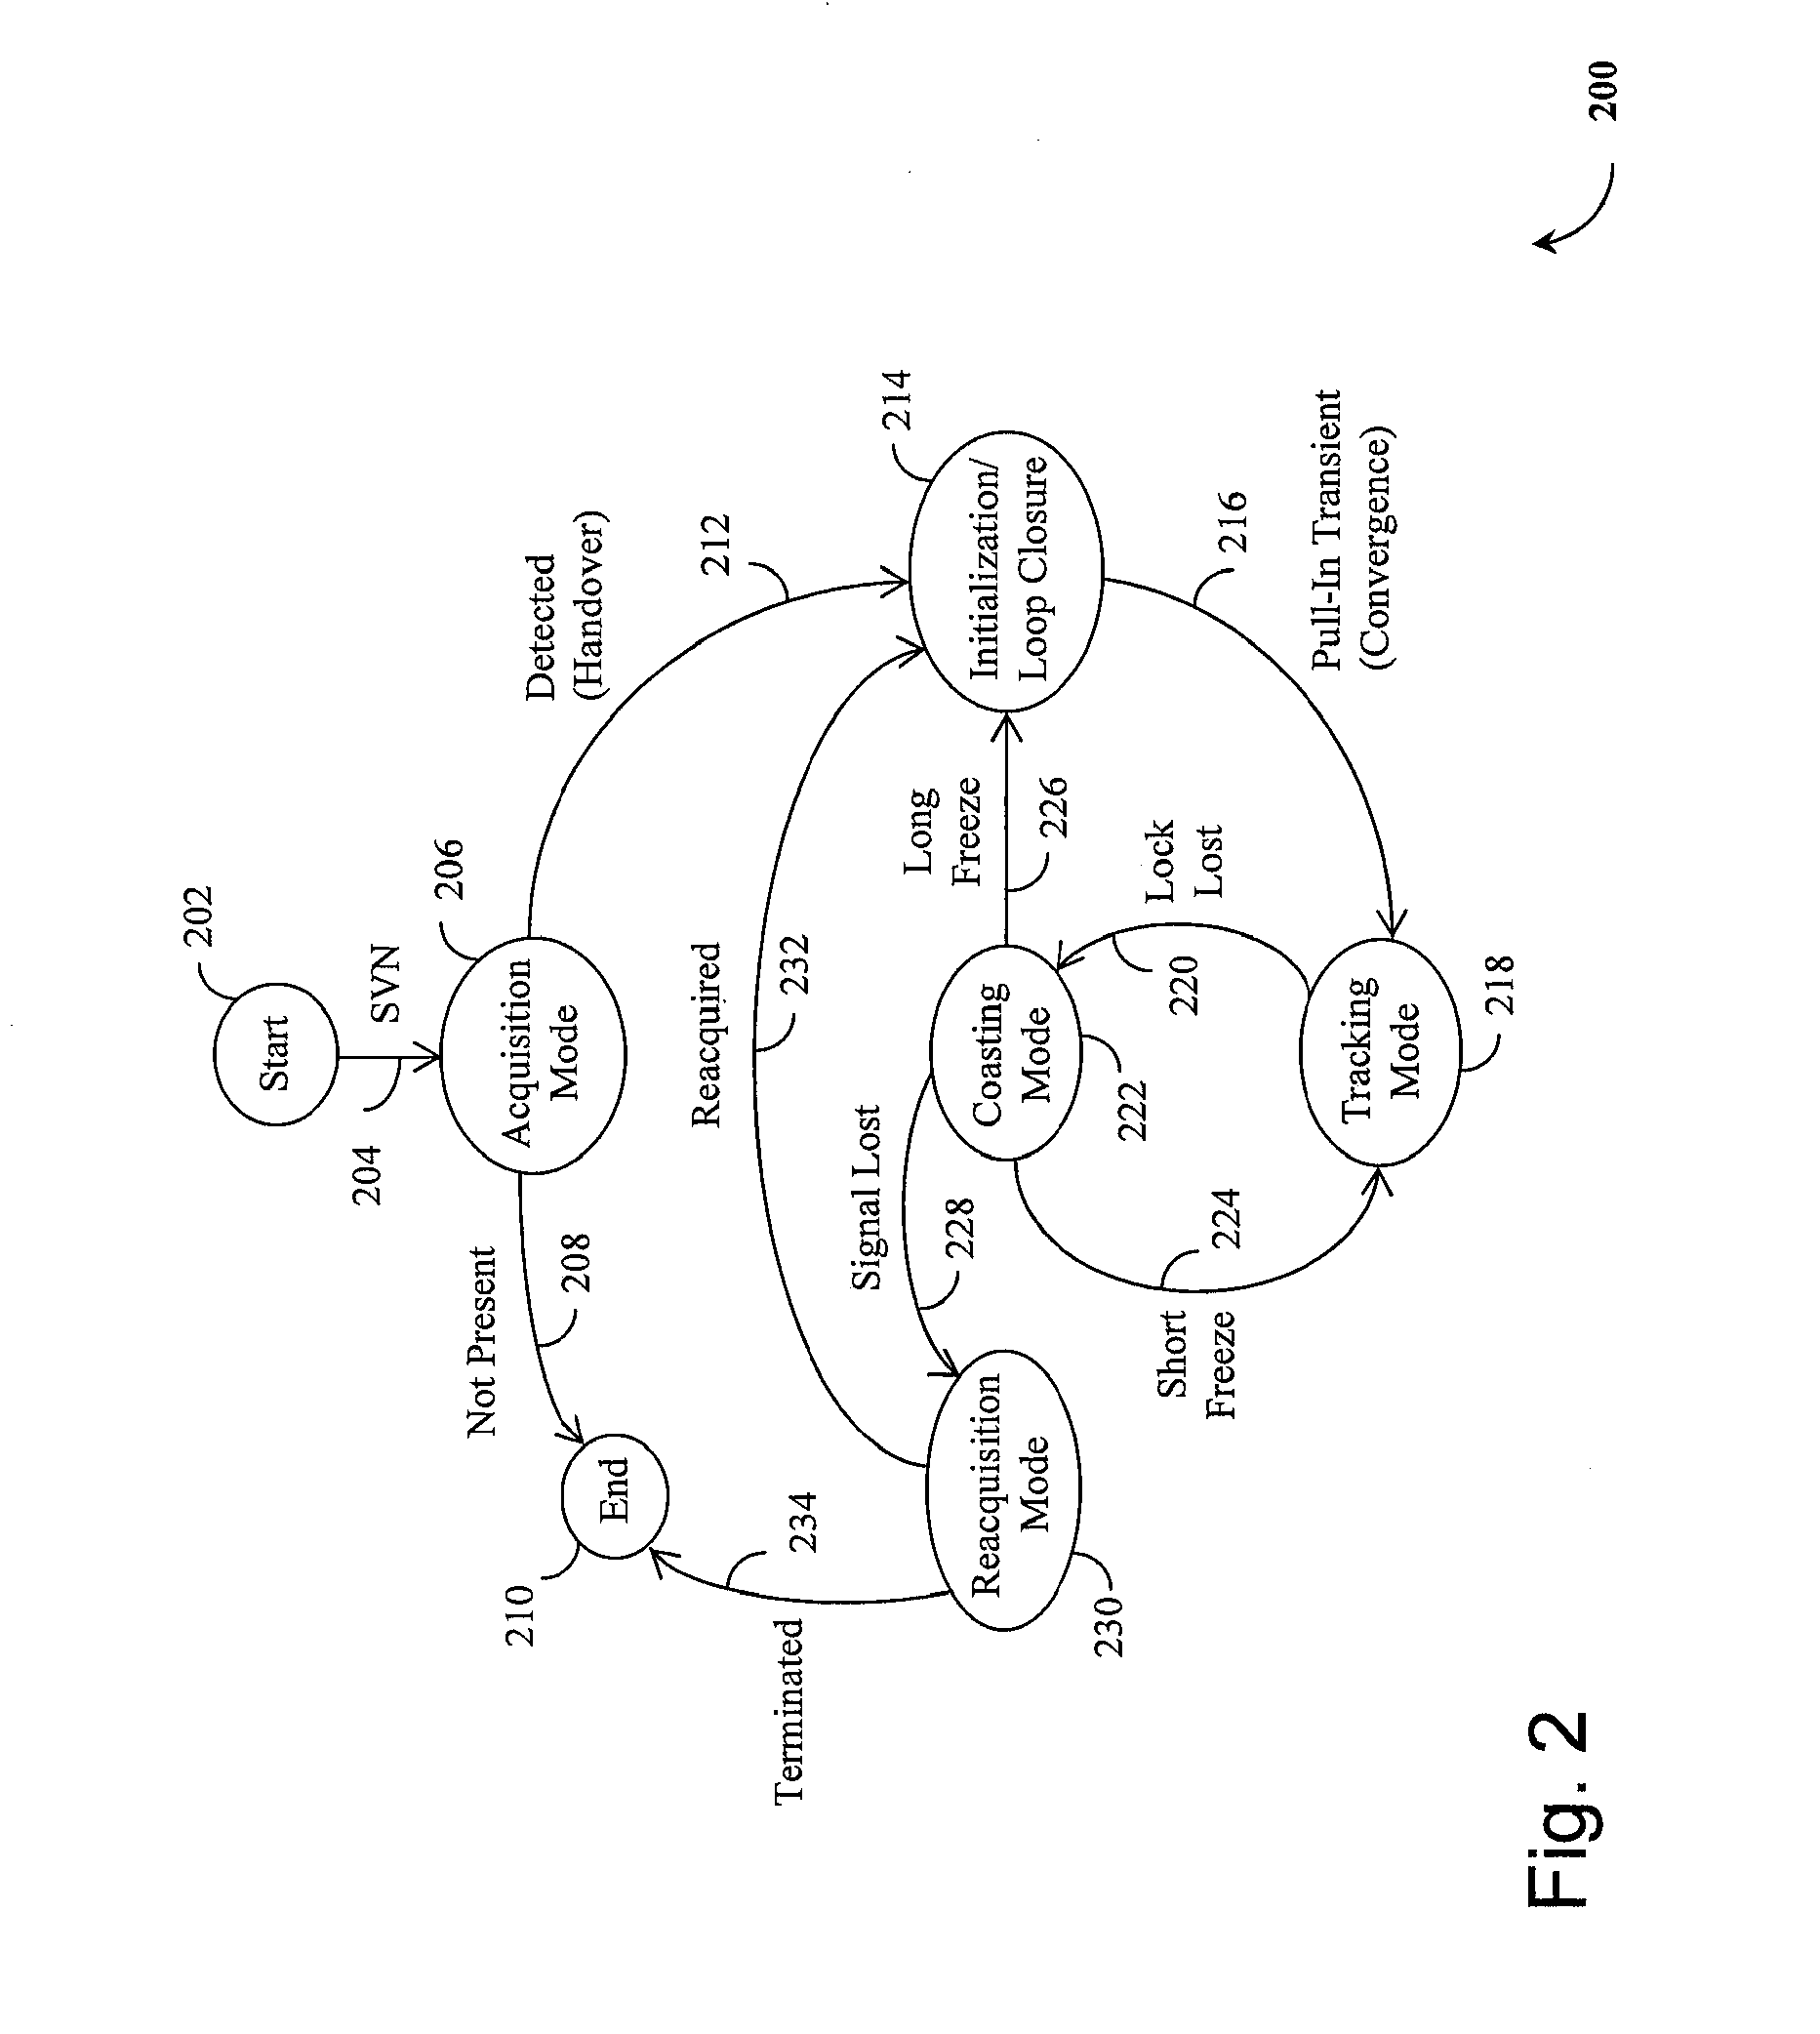 Method and device for tracking weak global navigation satellite system (GNSS) signals